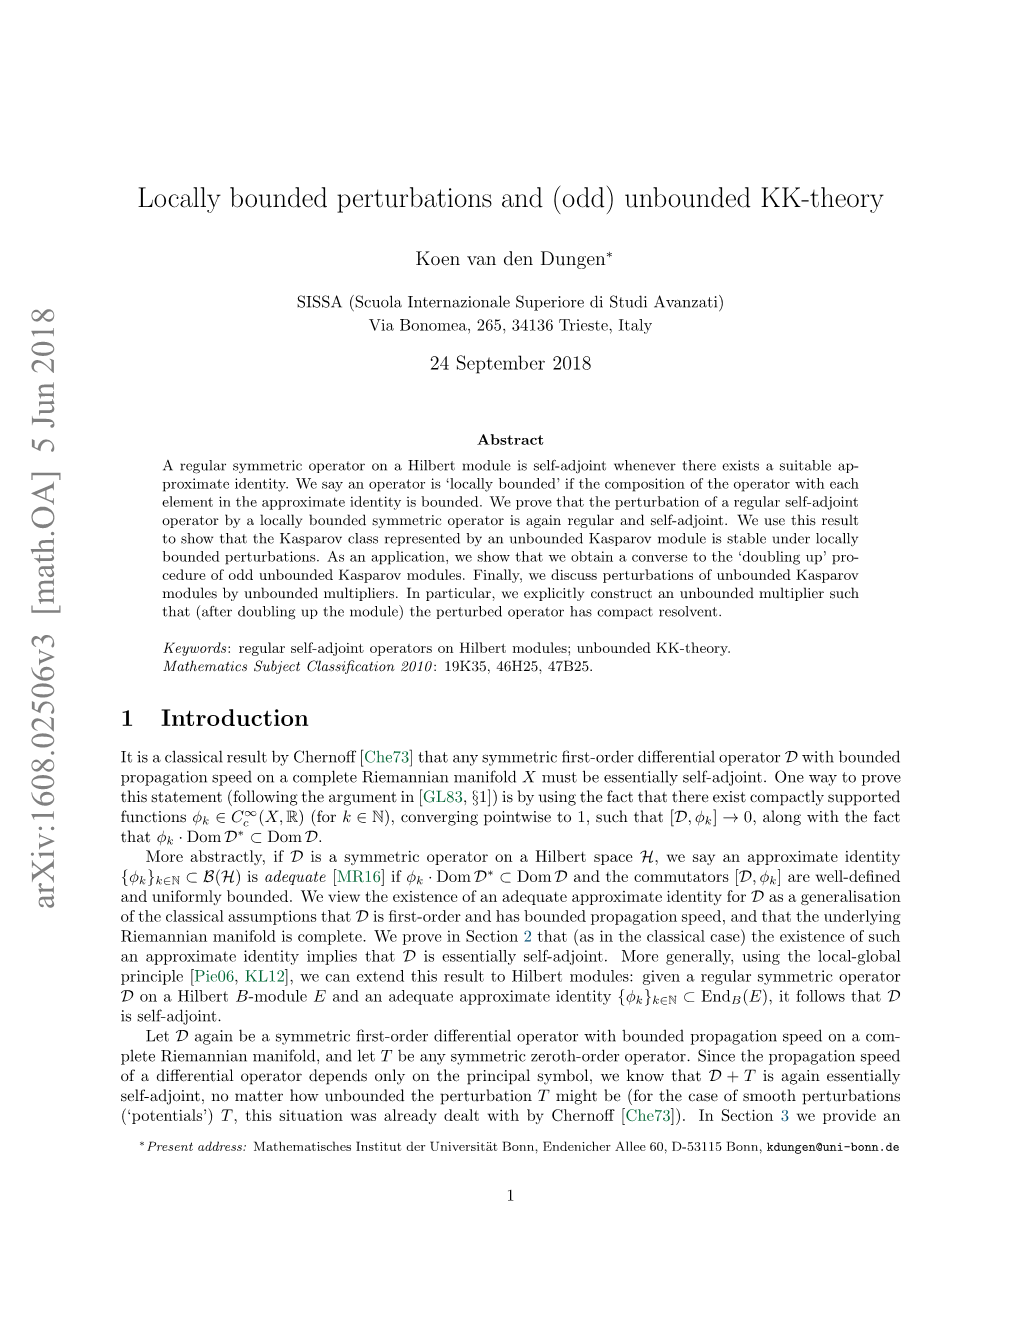 Locally Bounded Perturbations and (Odd) Unbounded KK-Theory